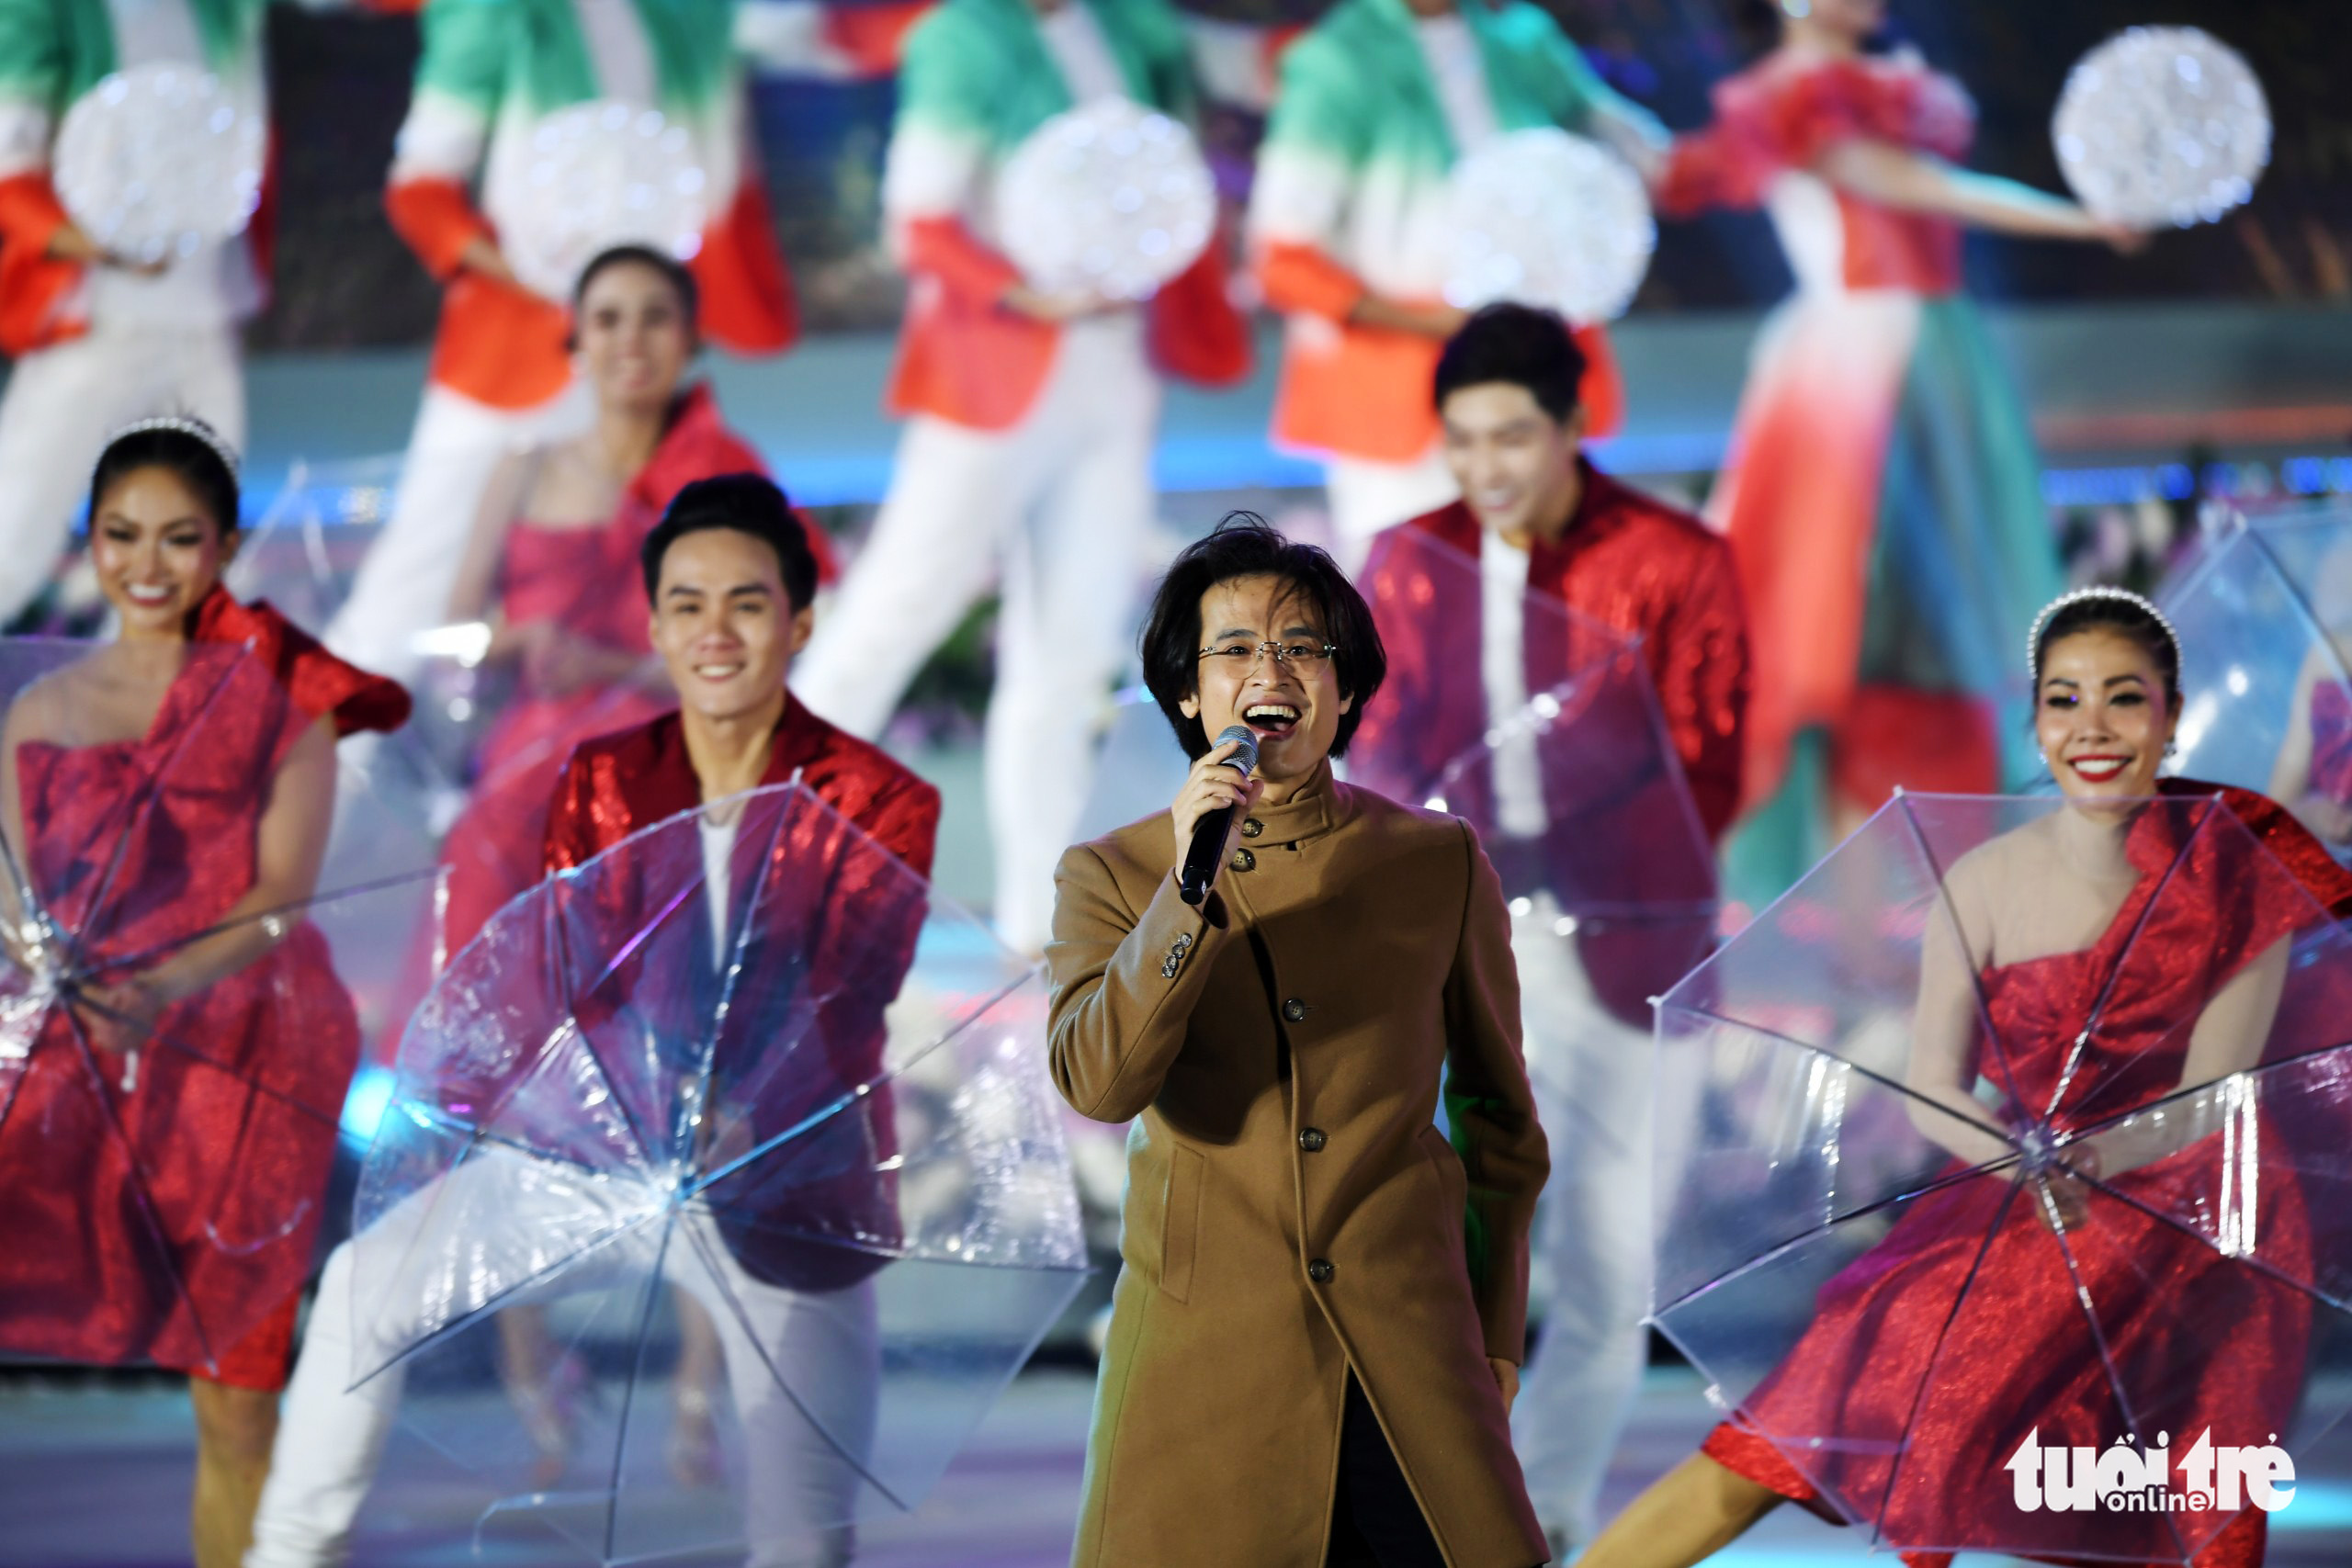 Singer Ha Anh Tuan performs at the opening ceremony of the Da Lat Flower Festival 2022 in Da Lat City, Lam Dong Province, Vietnam, December 18, 2022. Photo: M.V. / Tuoi Tre